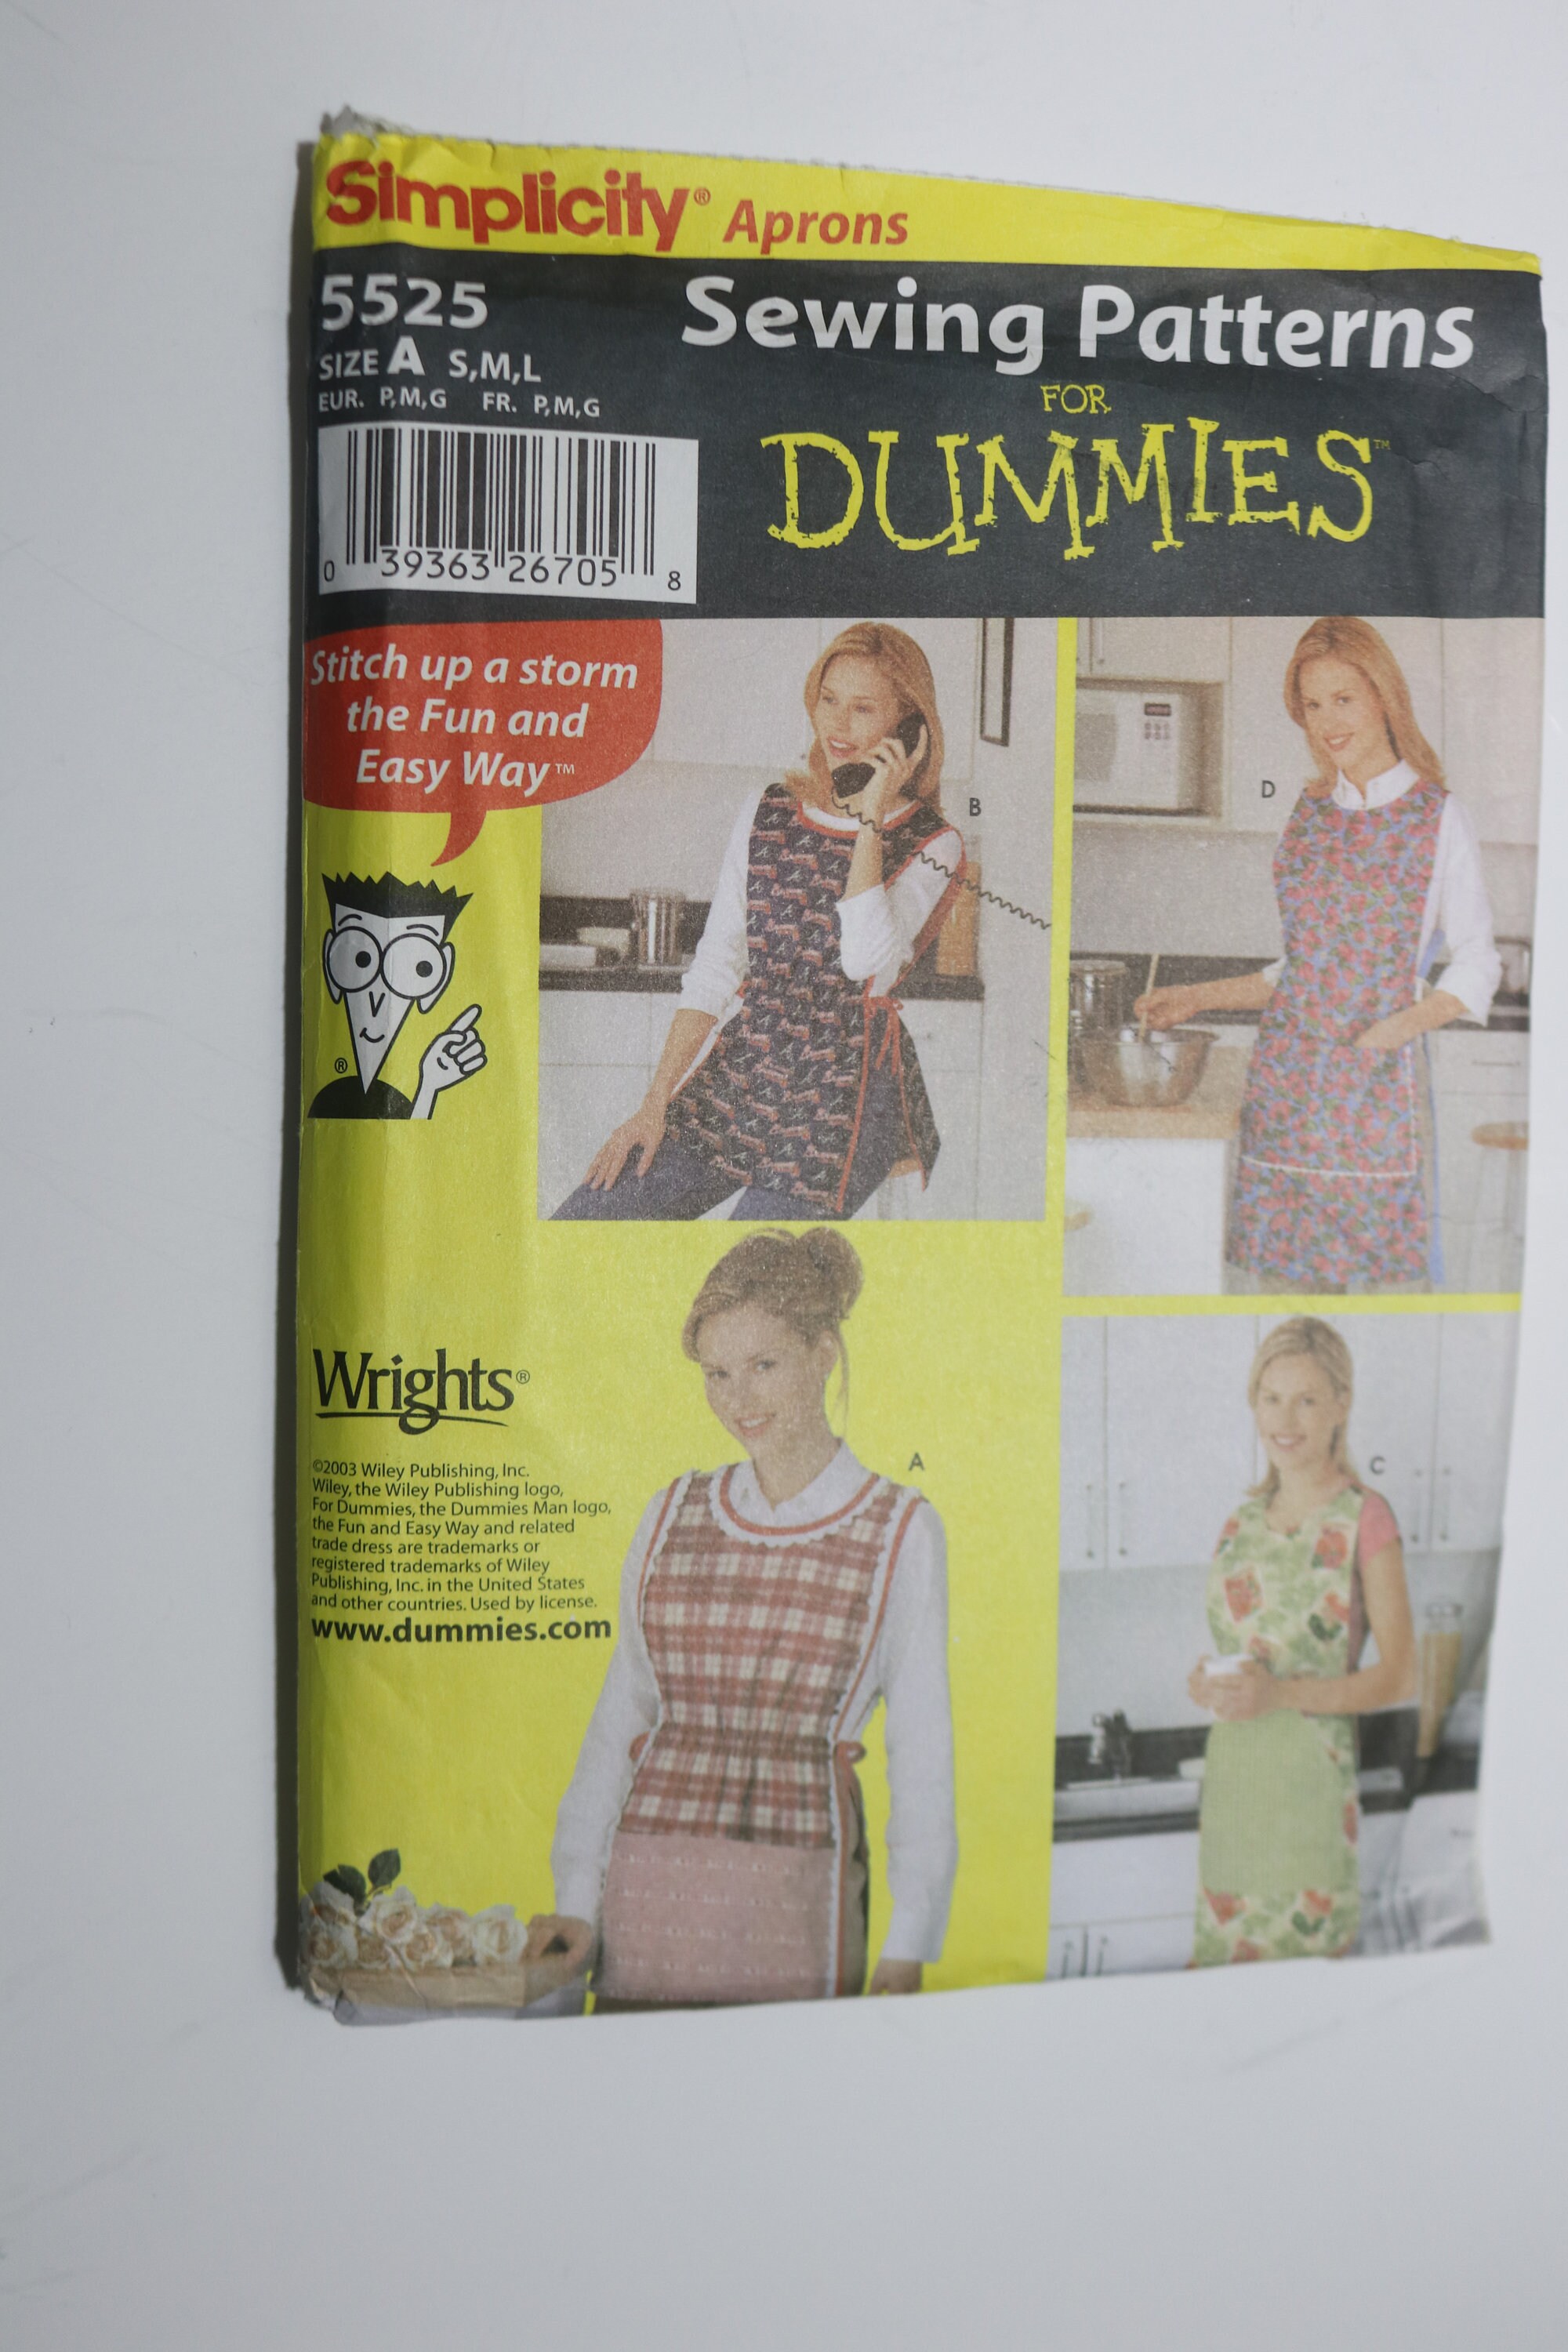 Free: Simplicity 5525 Sewing Patterns for Dummies Aprons - Sewing -   Auctions for Free Stuff